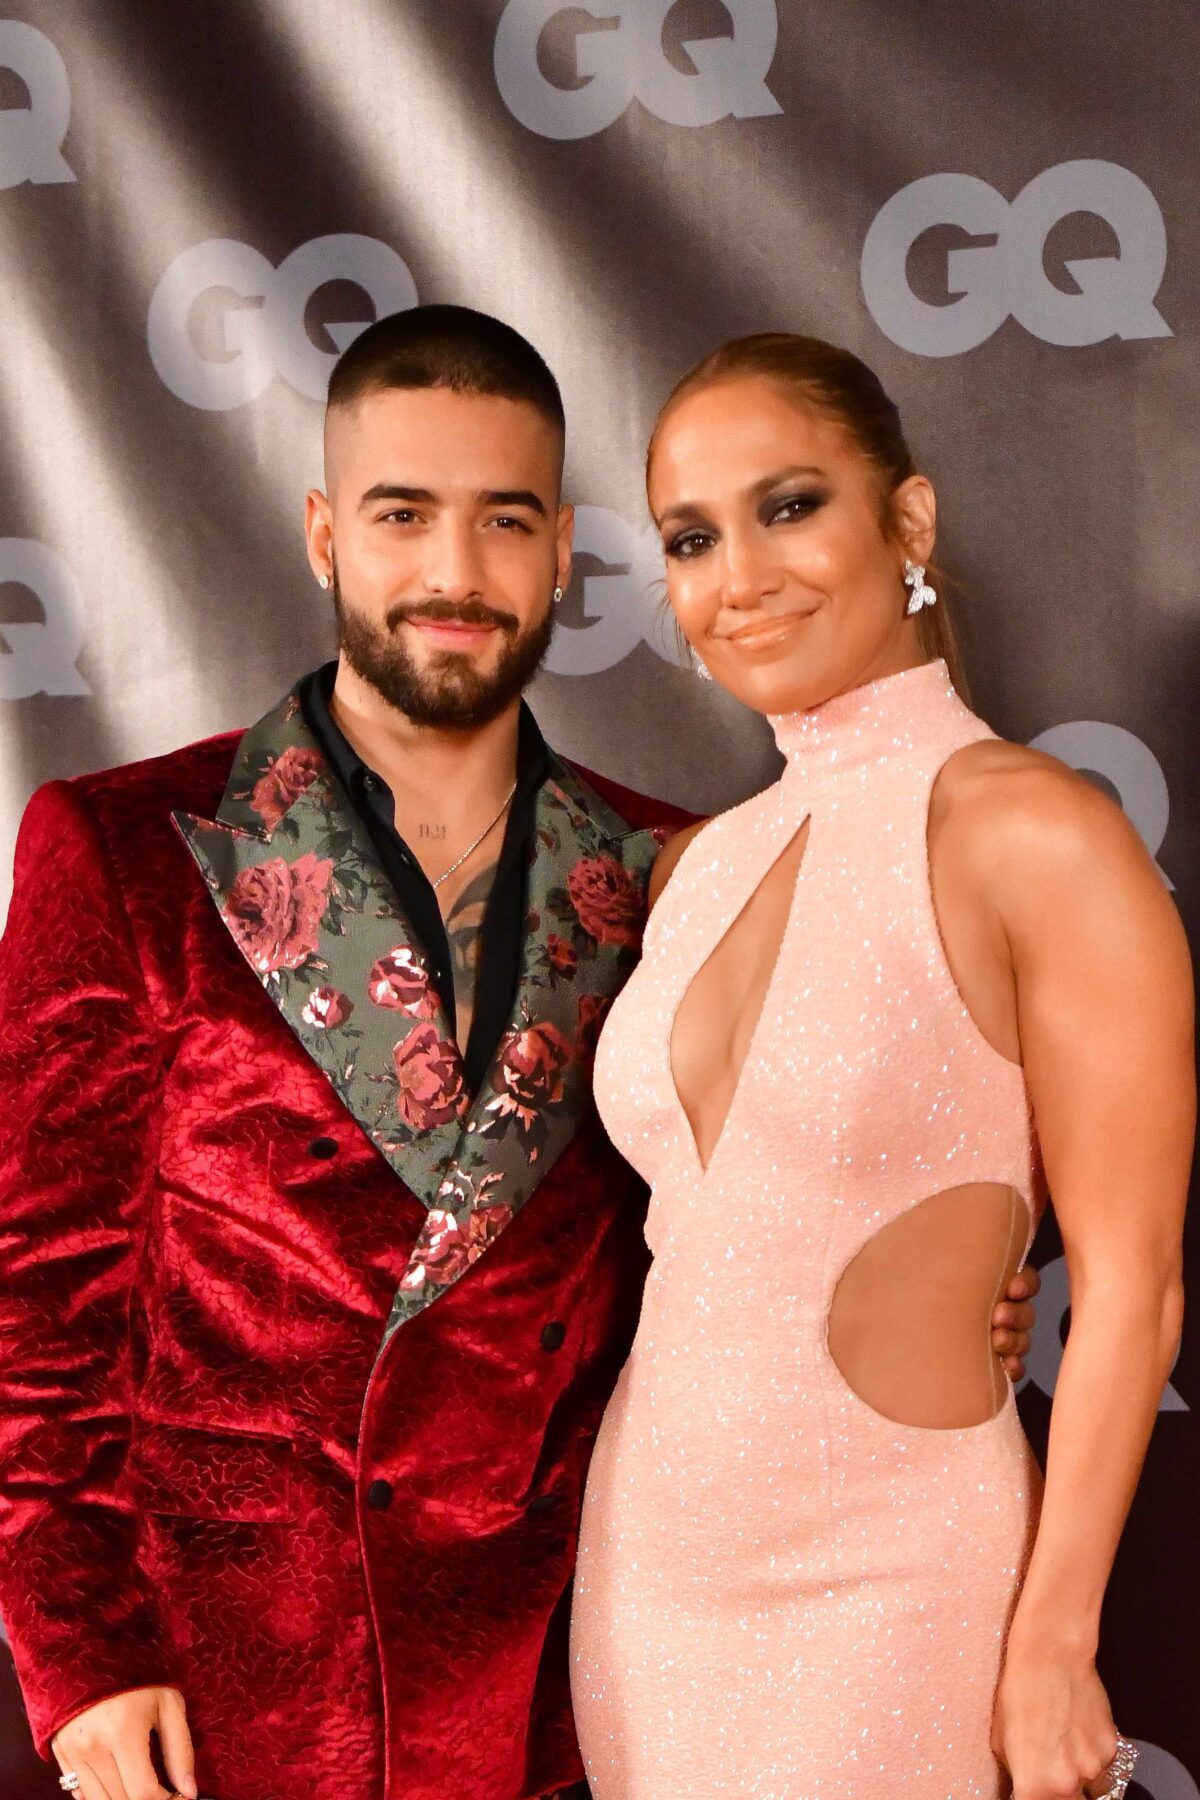 NEW YORK, NEW YORK - OCTOBER 31: Maluma and Jennifer Lopez are seen filming on location for 'Marry Me' at the Brooklyn Expo Center on October 31, 2019 in New York City.